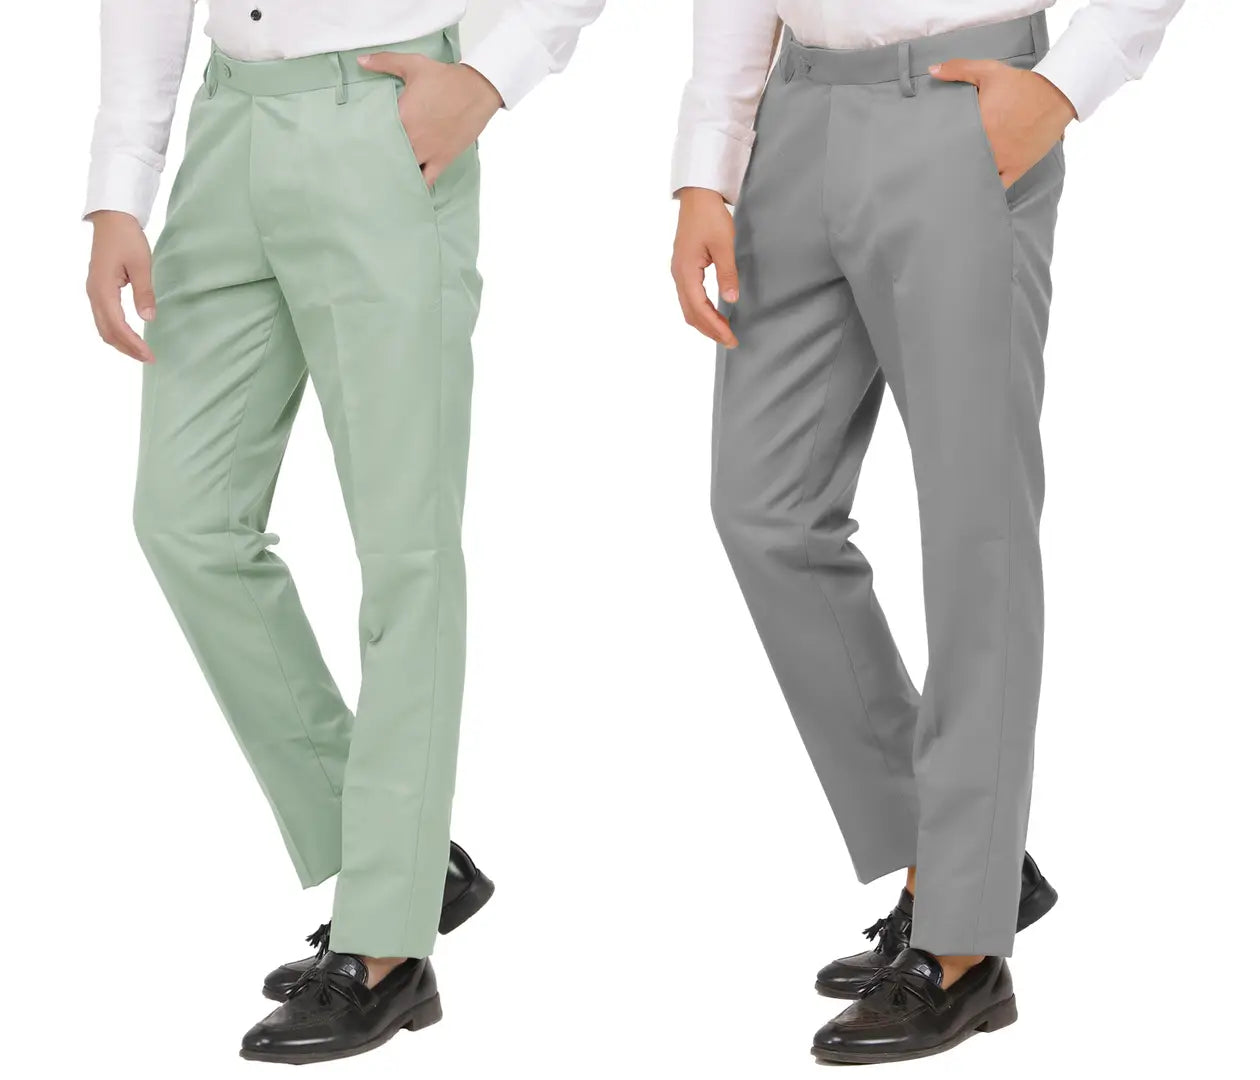 Kundan Men Poly-Viscose Blended Olive Green and Light Cot Grey Formal Trousers ( Pack of 2 Trousers )